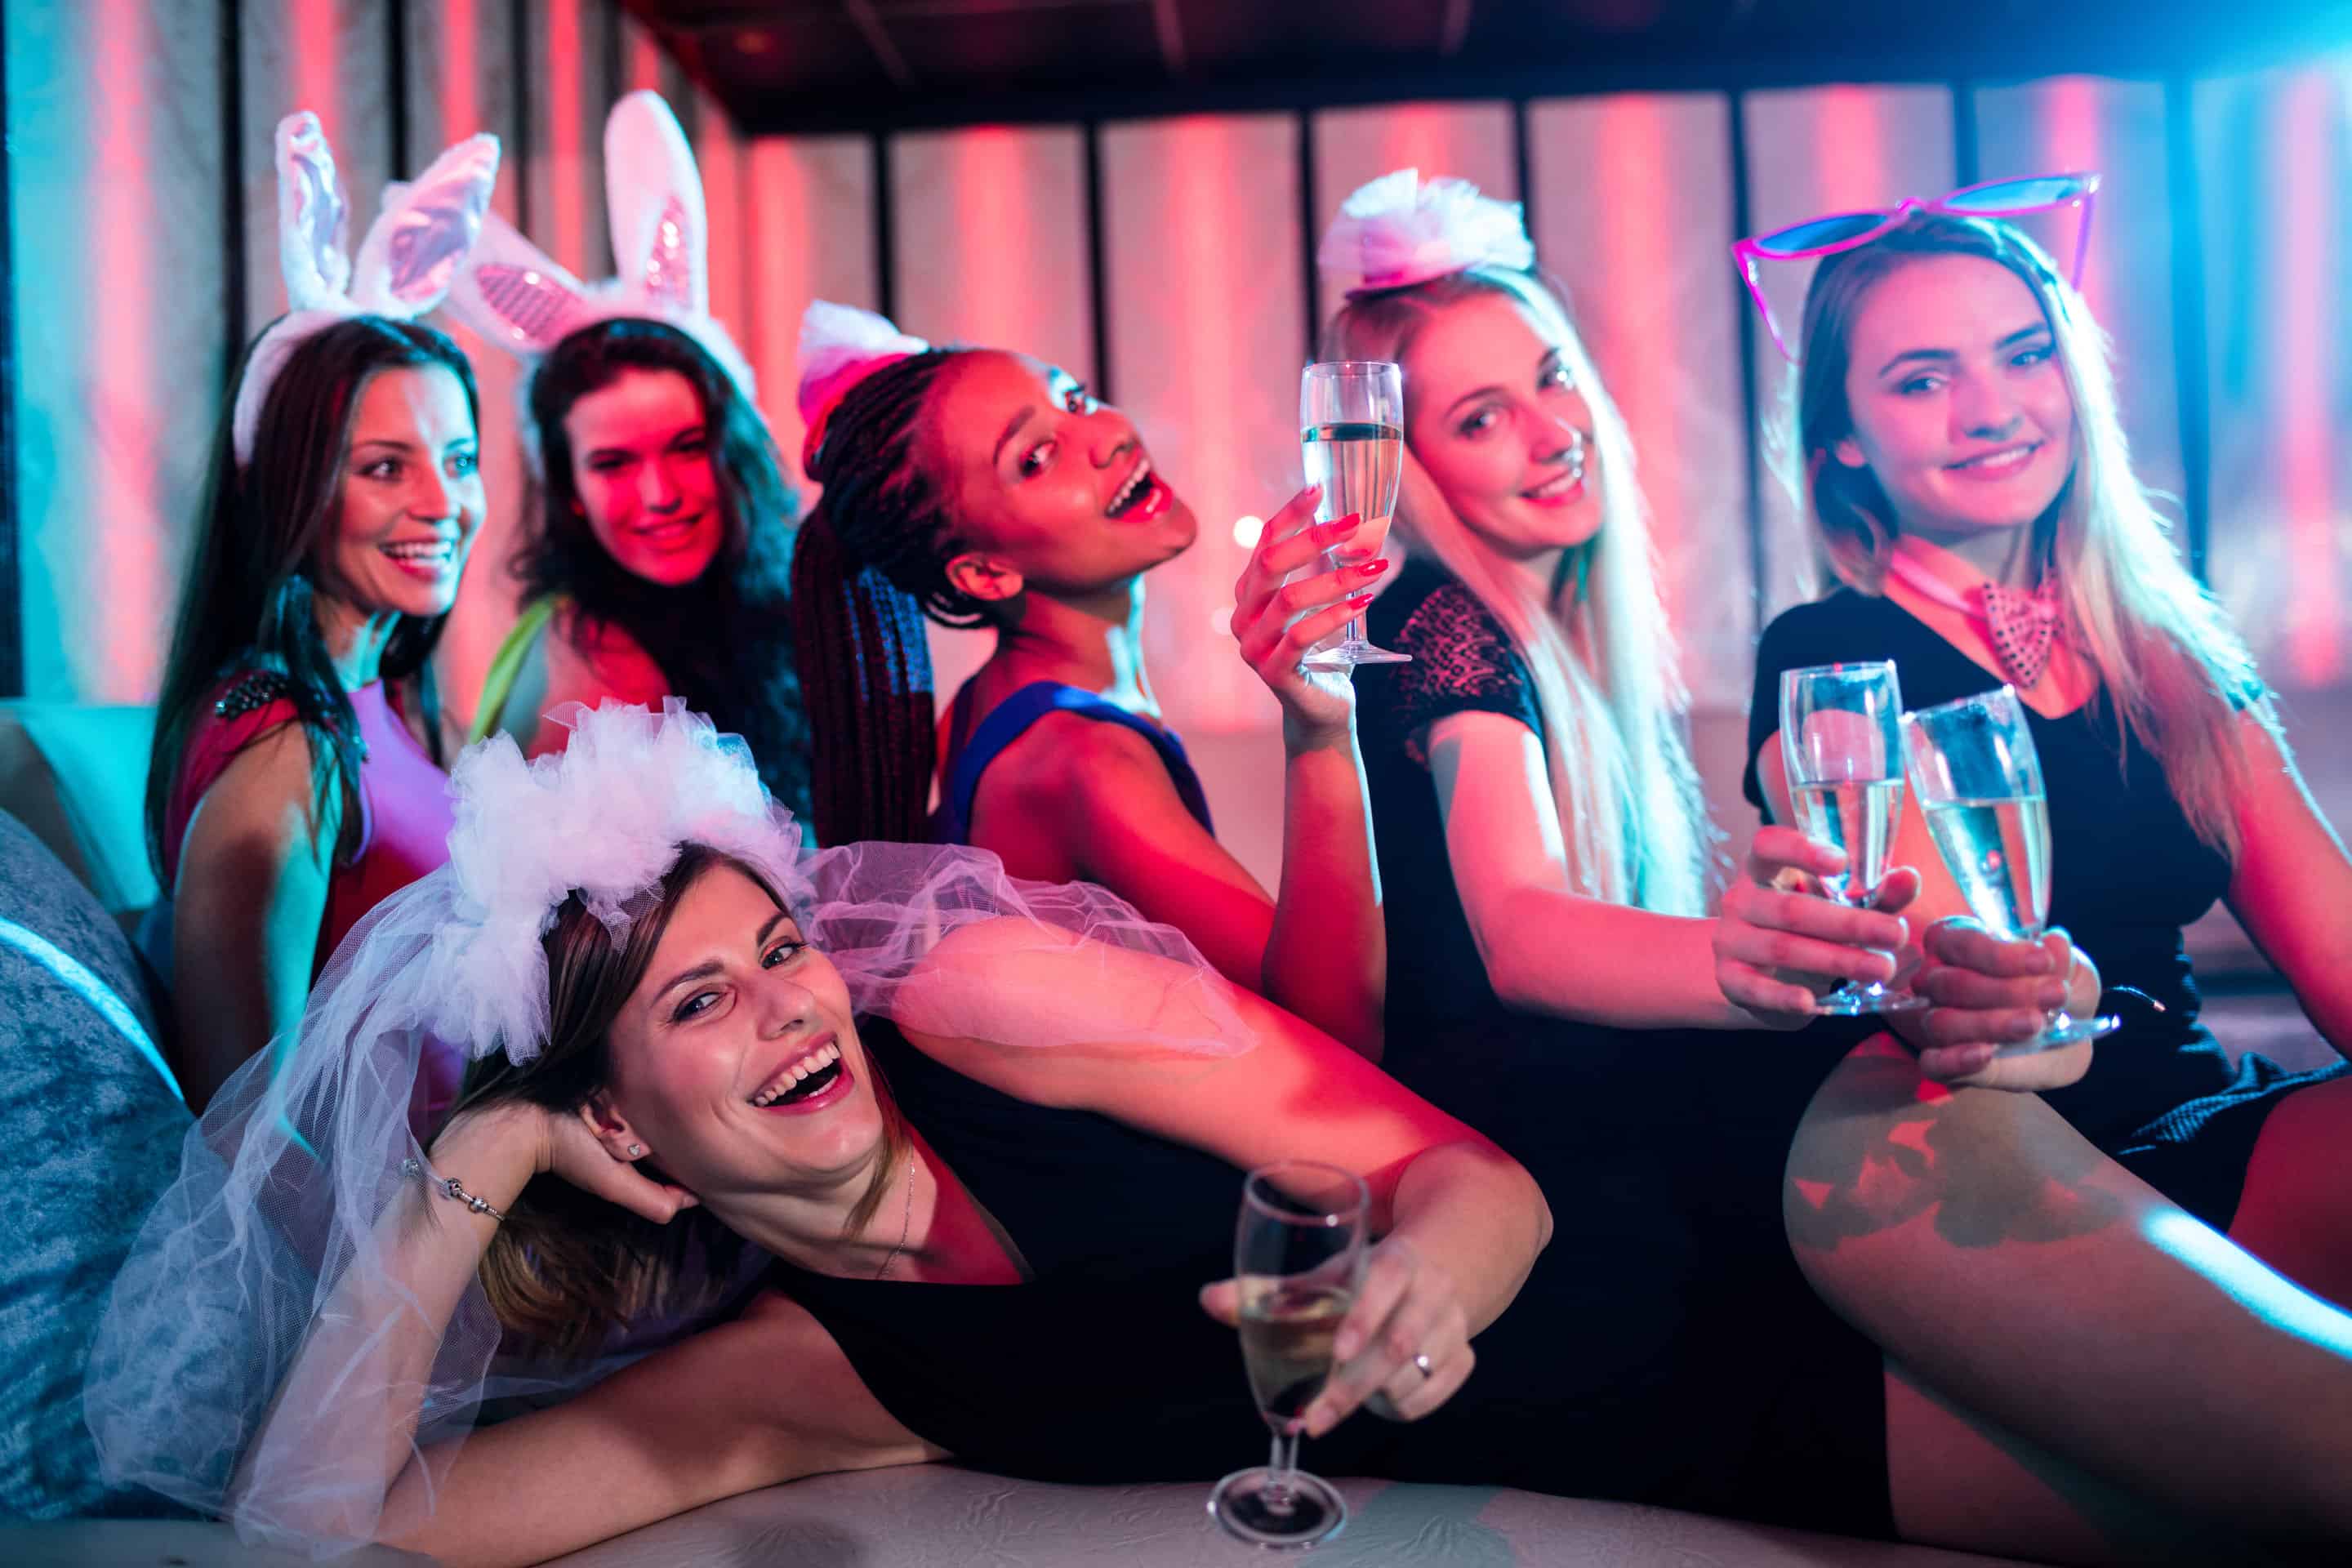 Group of women posing with glass of champagne in bar